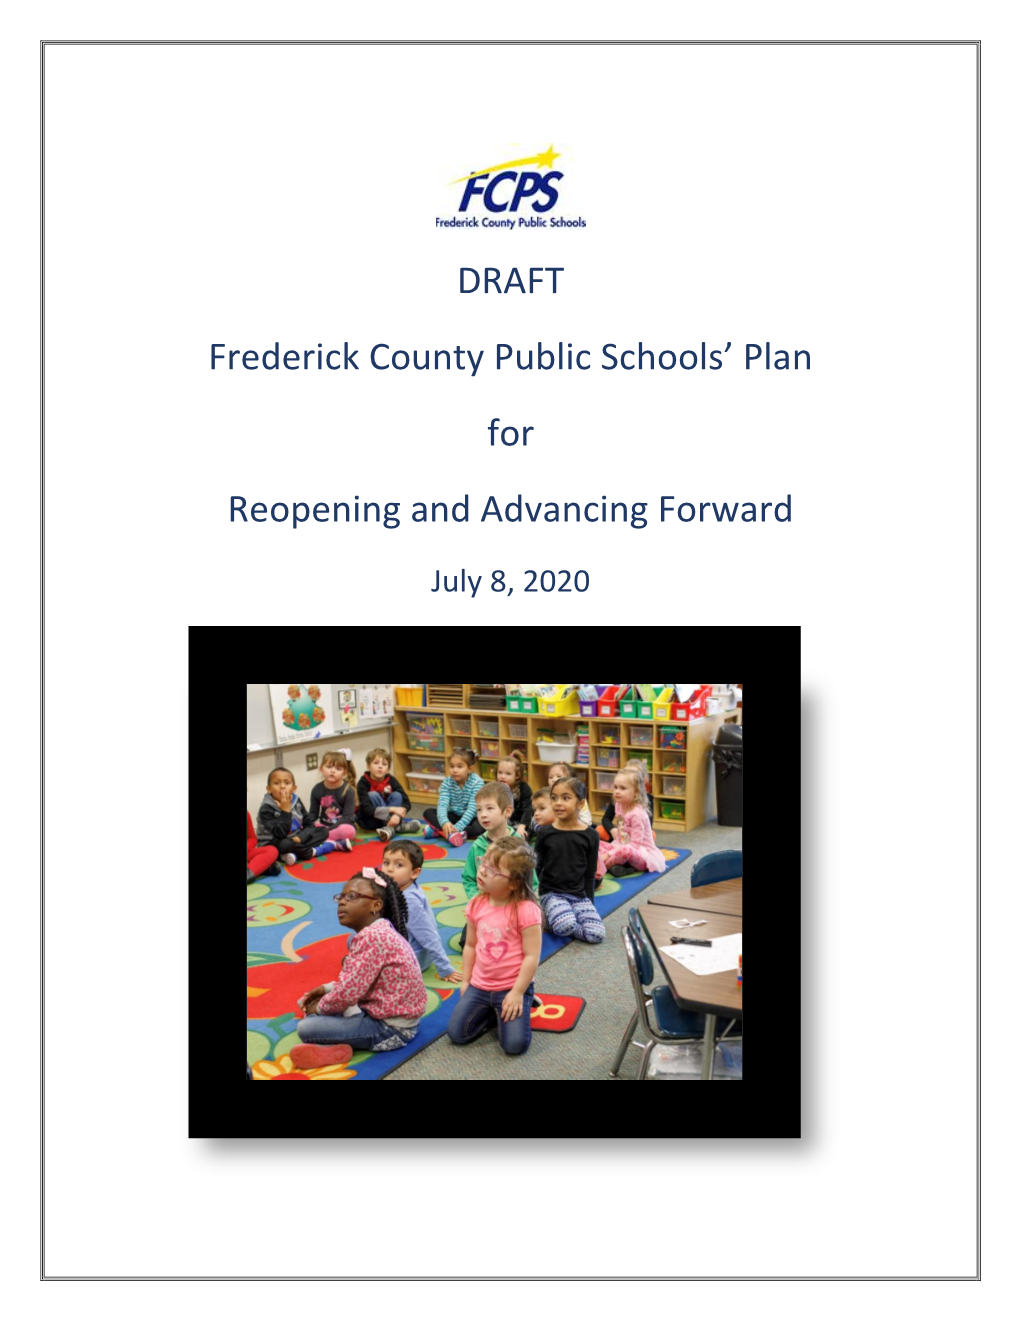 DRAFT Frederick County Public Schools' Plan for Reopening and Advancing Forward